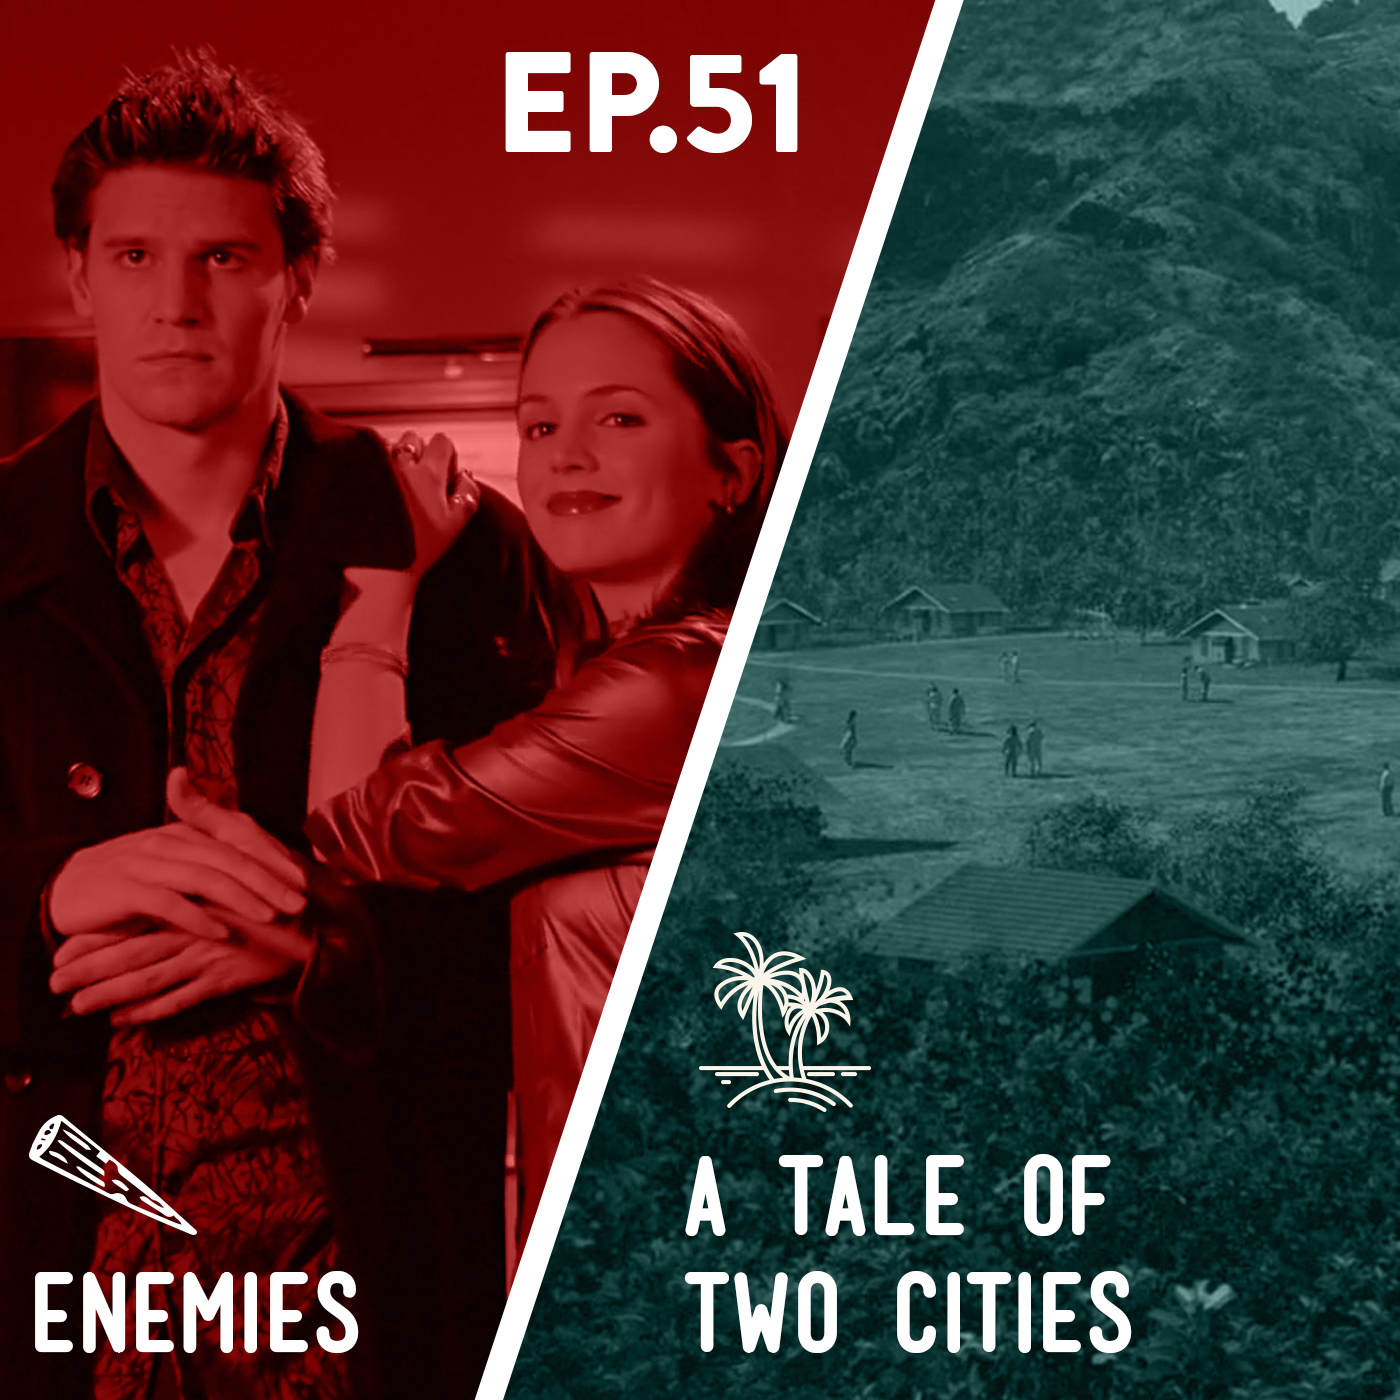 51 - Enemies / Tale of Two Cities Image